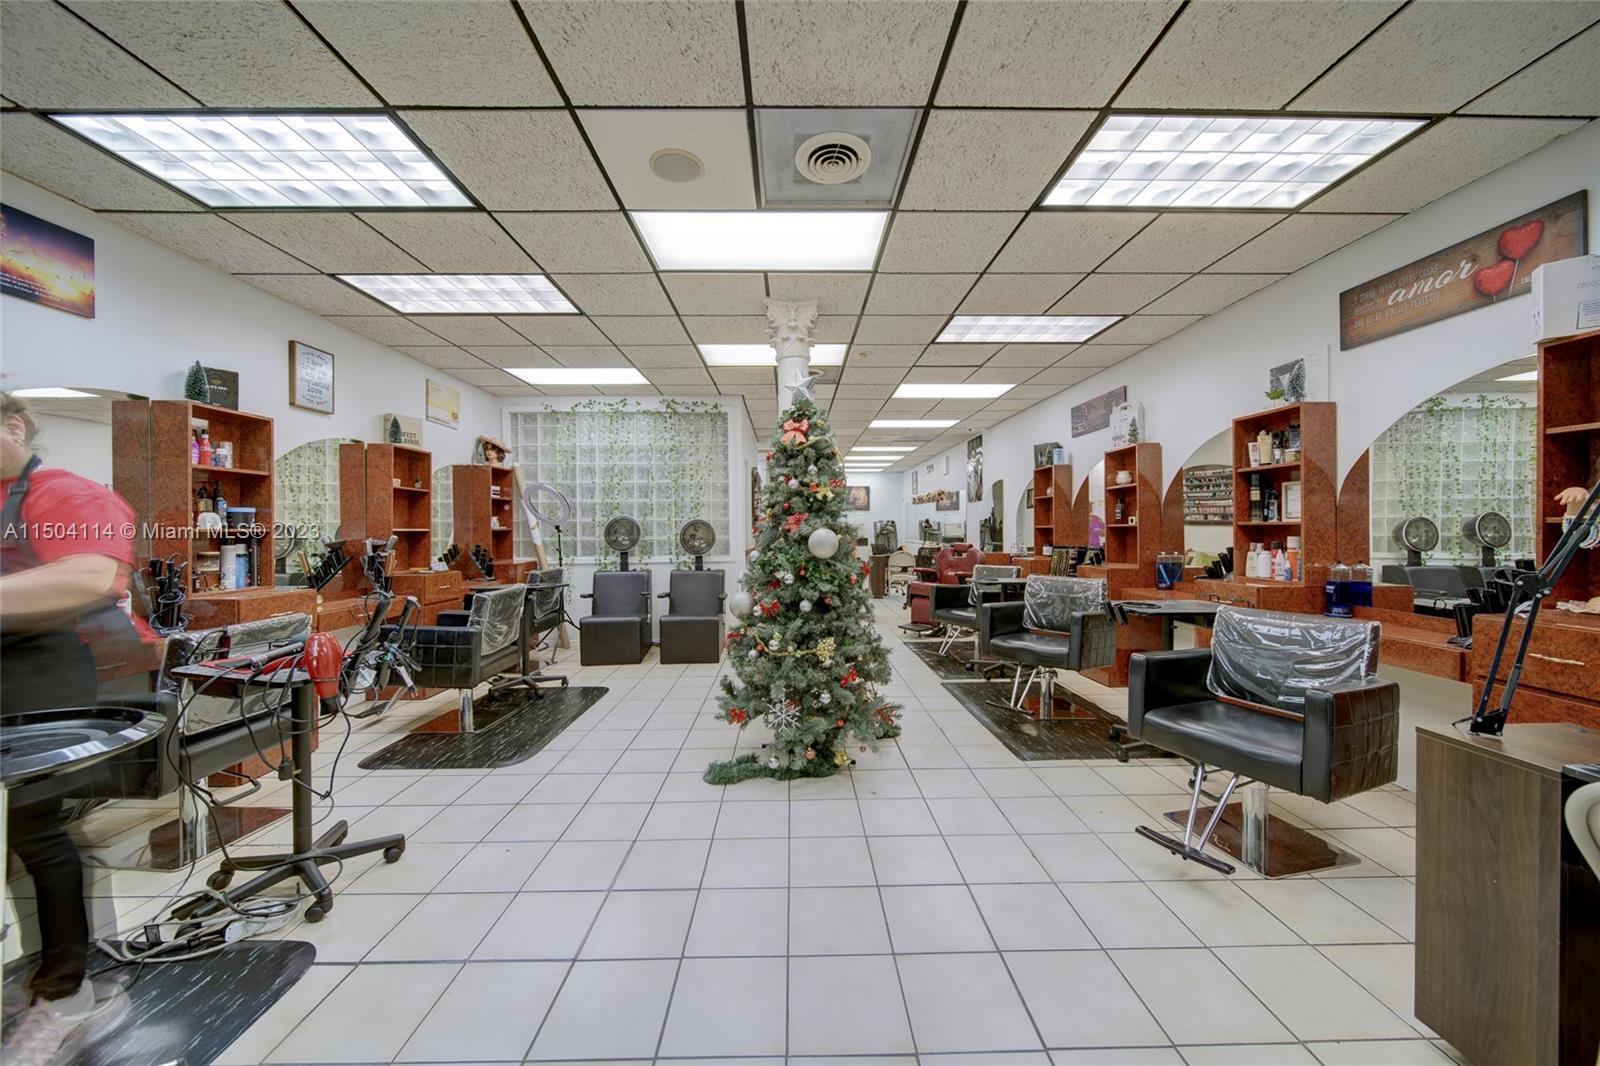 Full-Service Beauty Salon For Sale in The Crossing, Miami, Florida 33186, ,Businessopportunity,For Sale,Full-Service Beauty Salon For Sale in The Crossing,A11504114